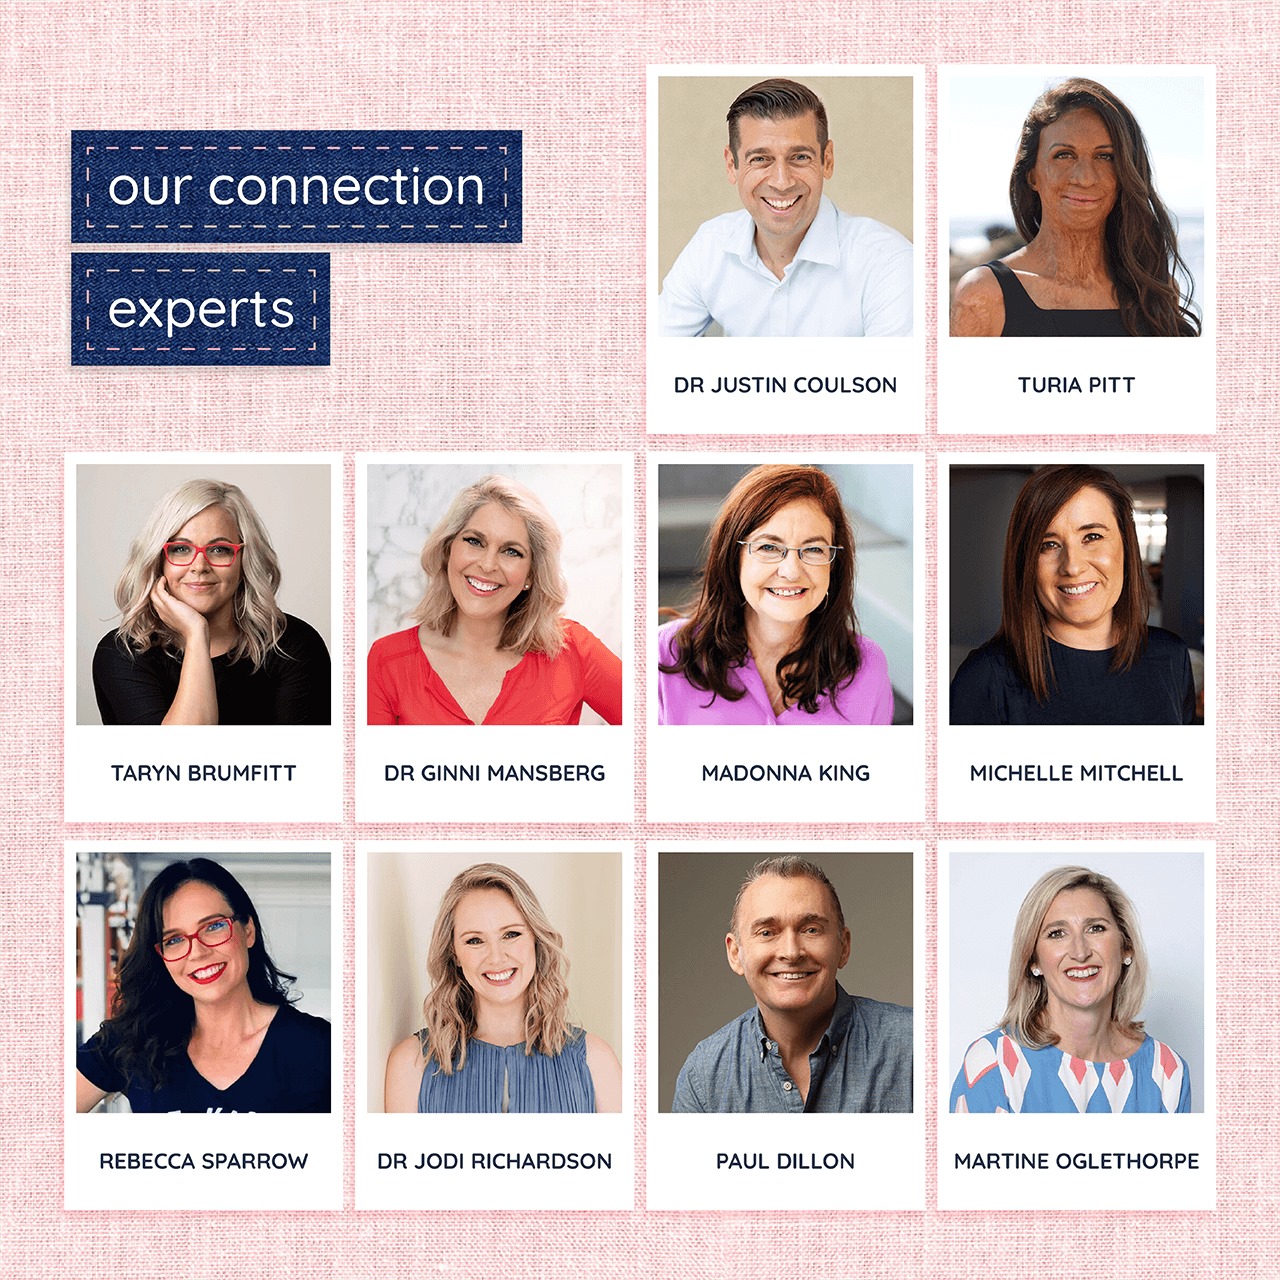 Miss-connection experts